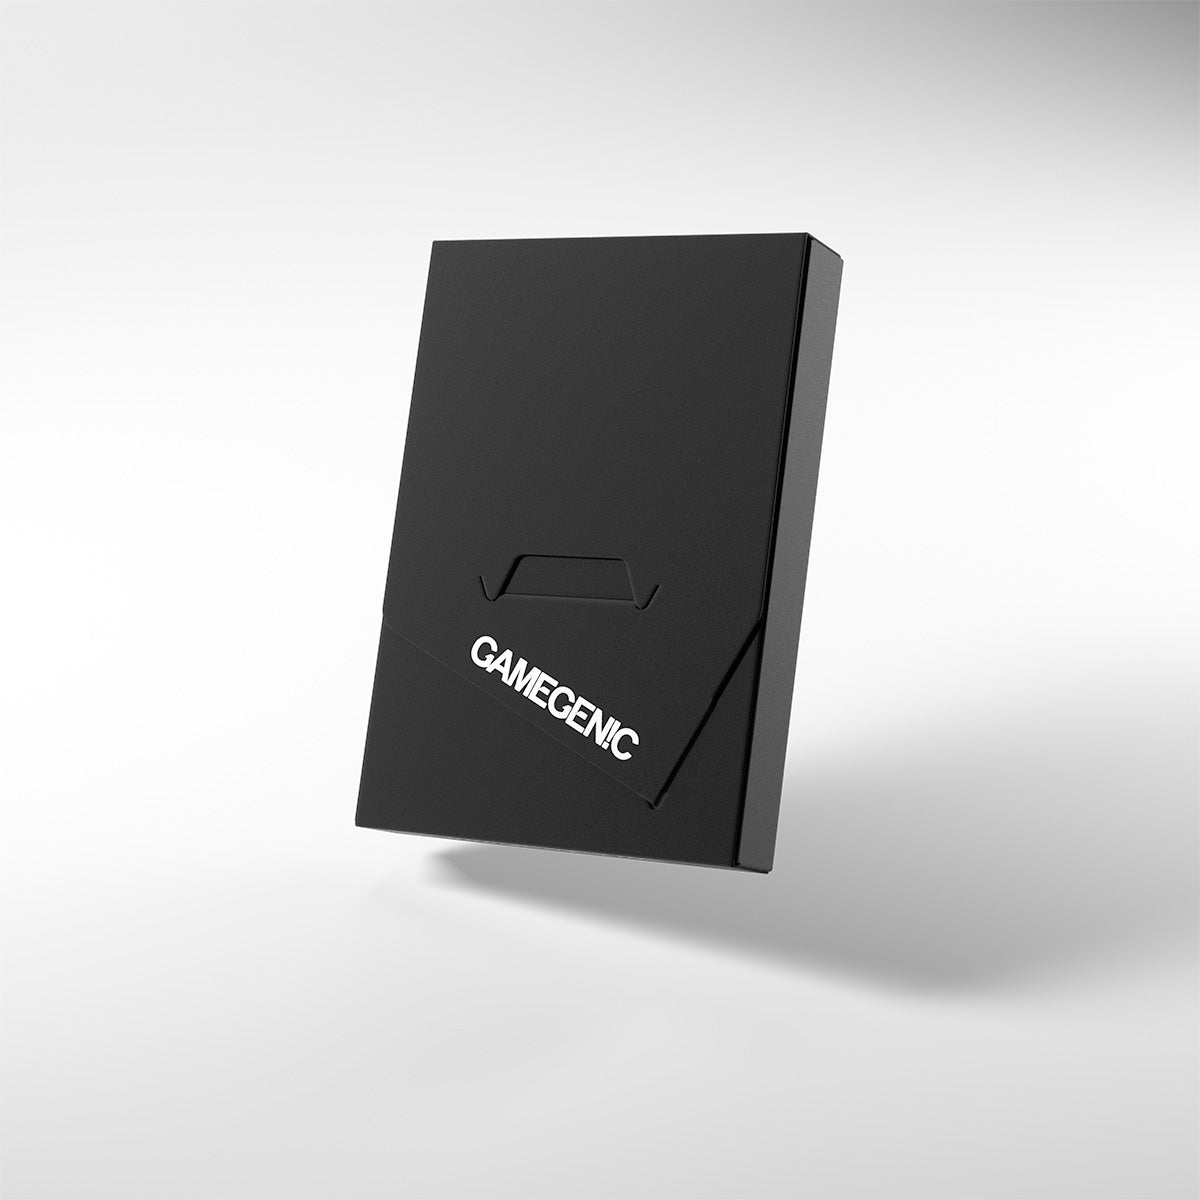 Gamegenic Casual Card Holder "Cube Pocket 15+"-Black-Gamegenic-Ace Cards & Collectibles